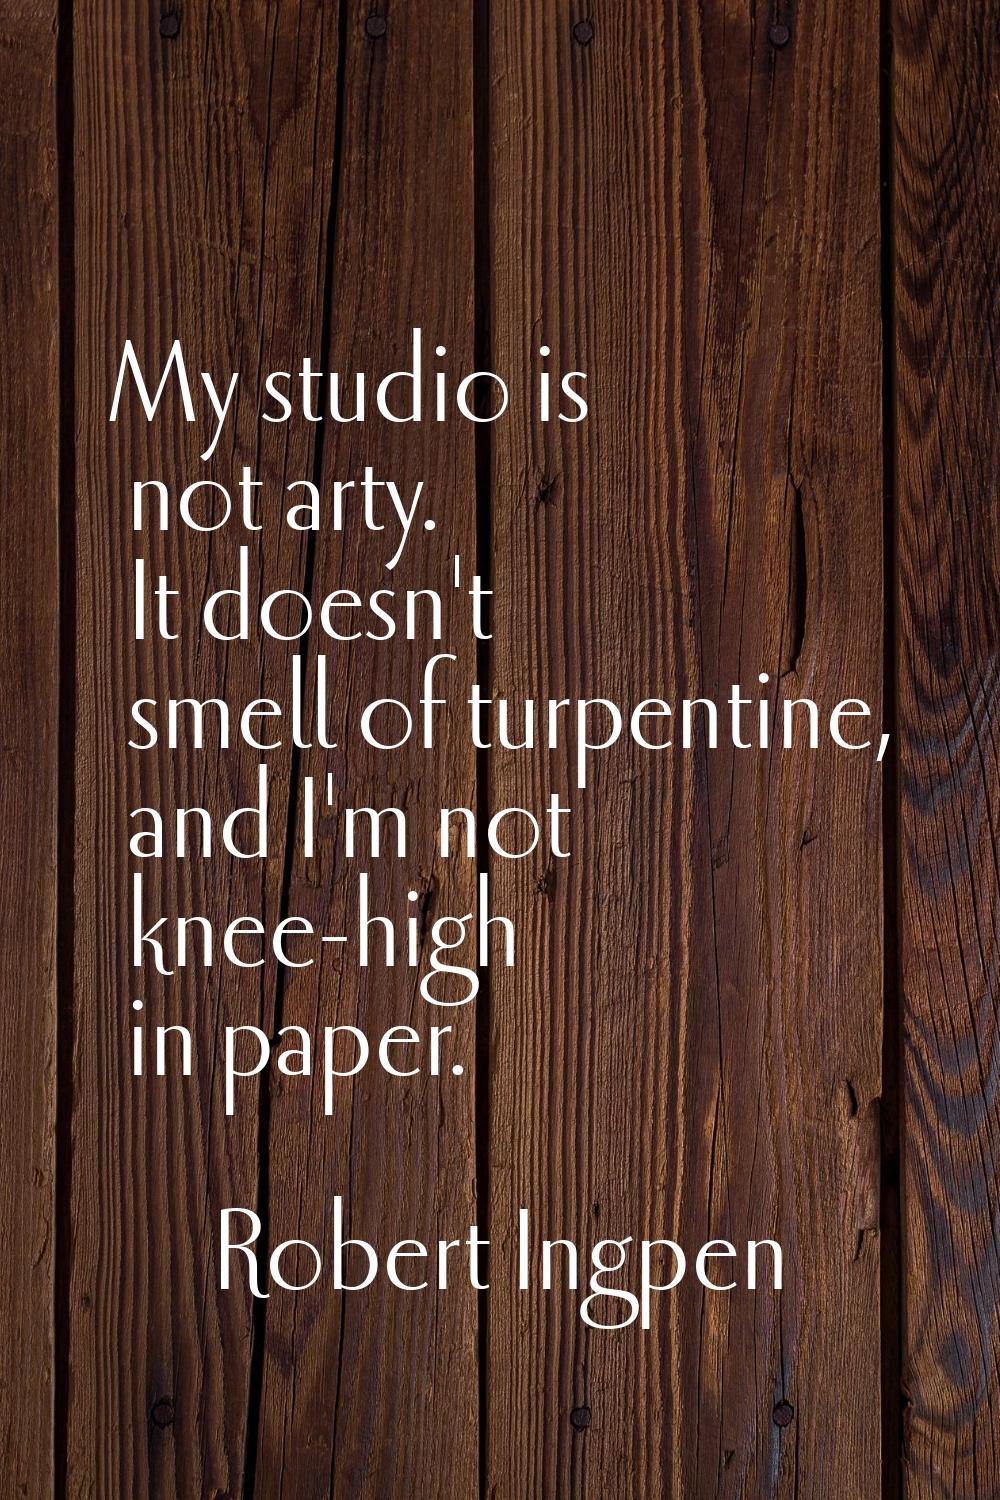 My studio is not arty. It doesn't smell of turpentine, and I'm not knee-high in paper.